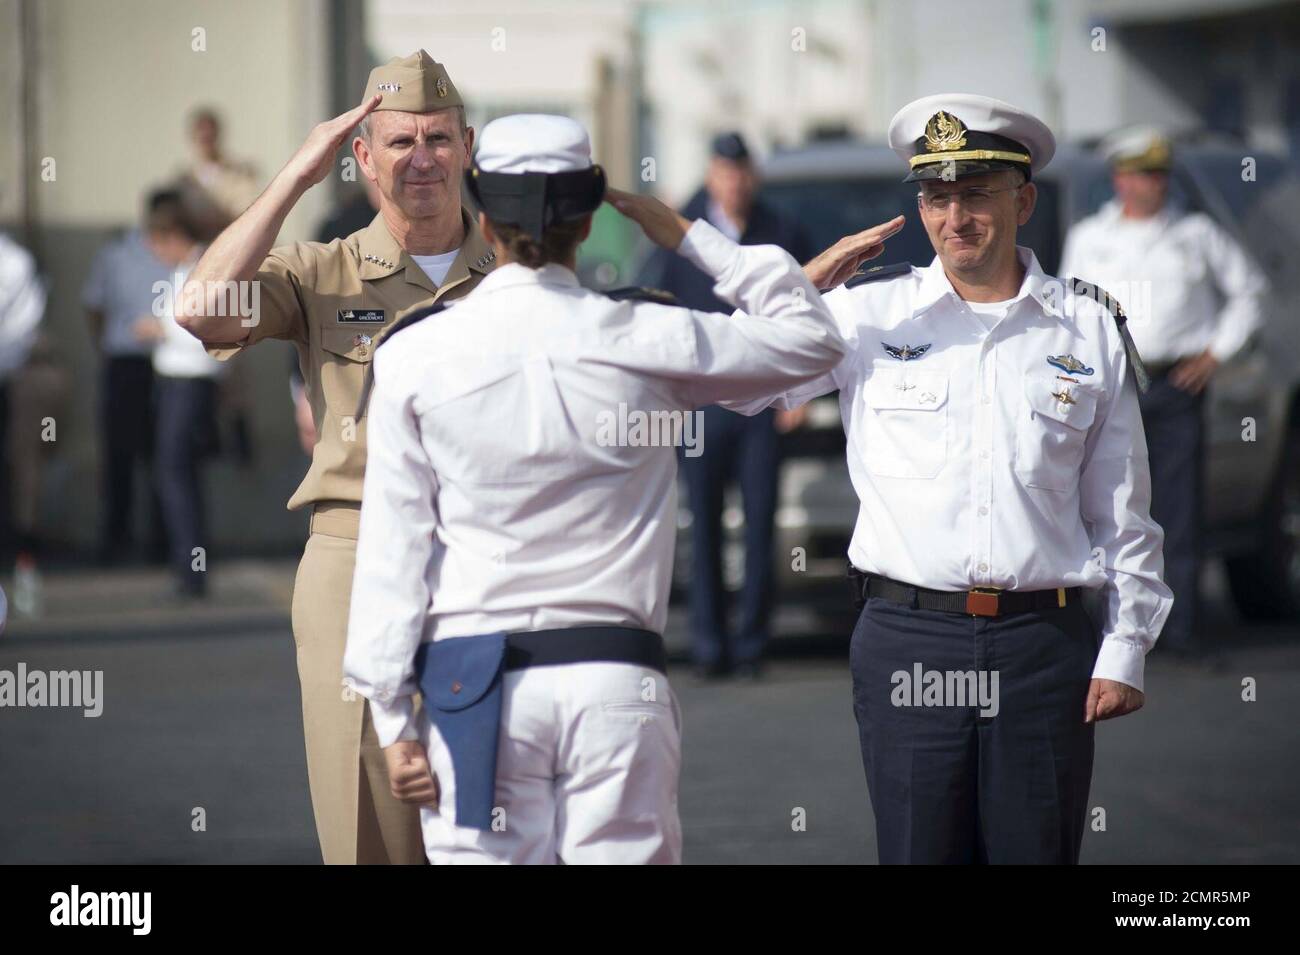 Jonathan Greenert is invited to perform a troop inspection with the Commander in Chief of Ram Rutberg. Stock Photo